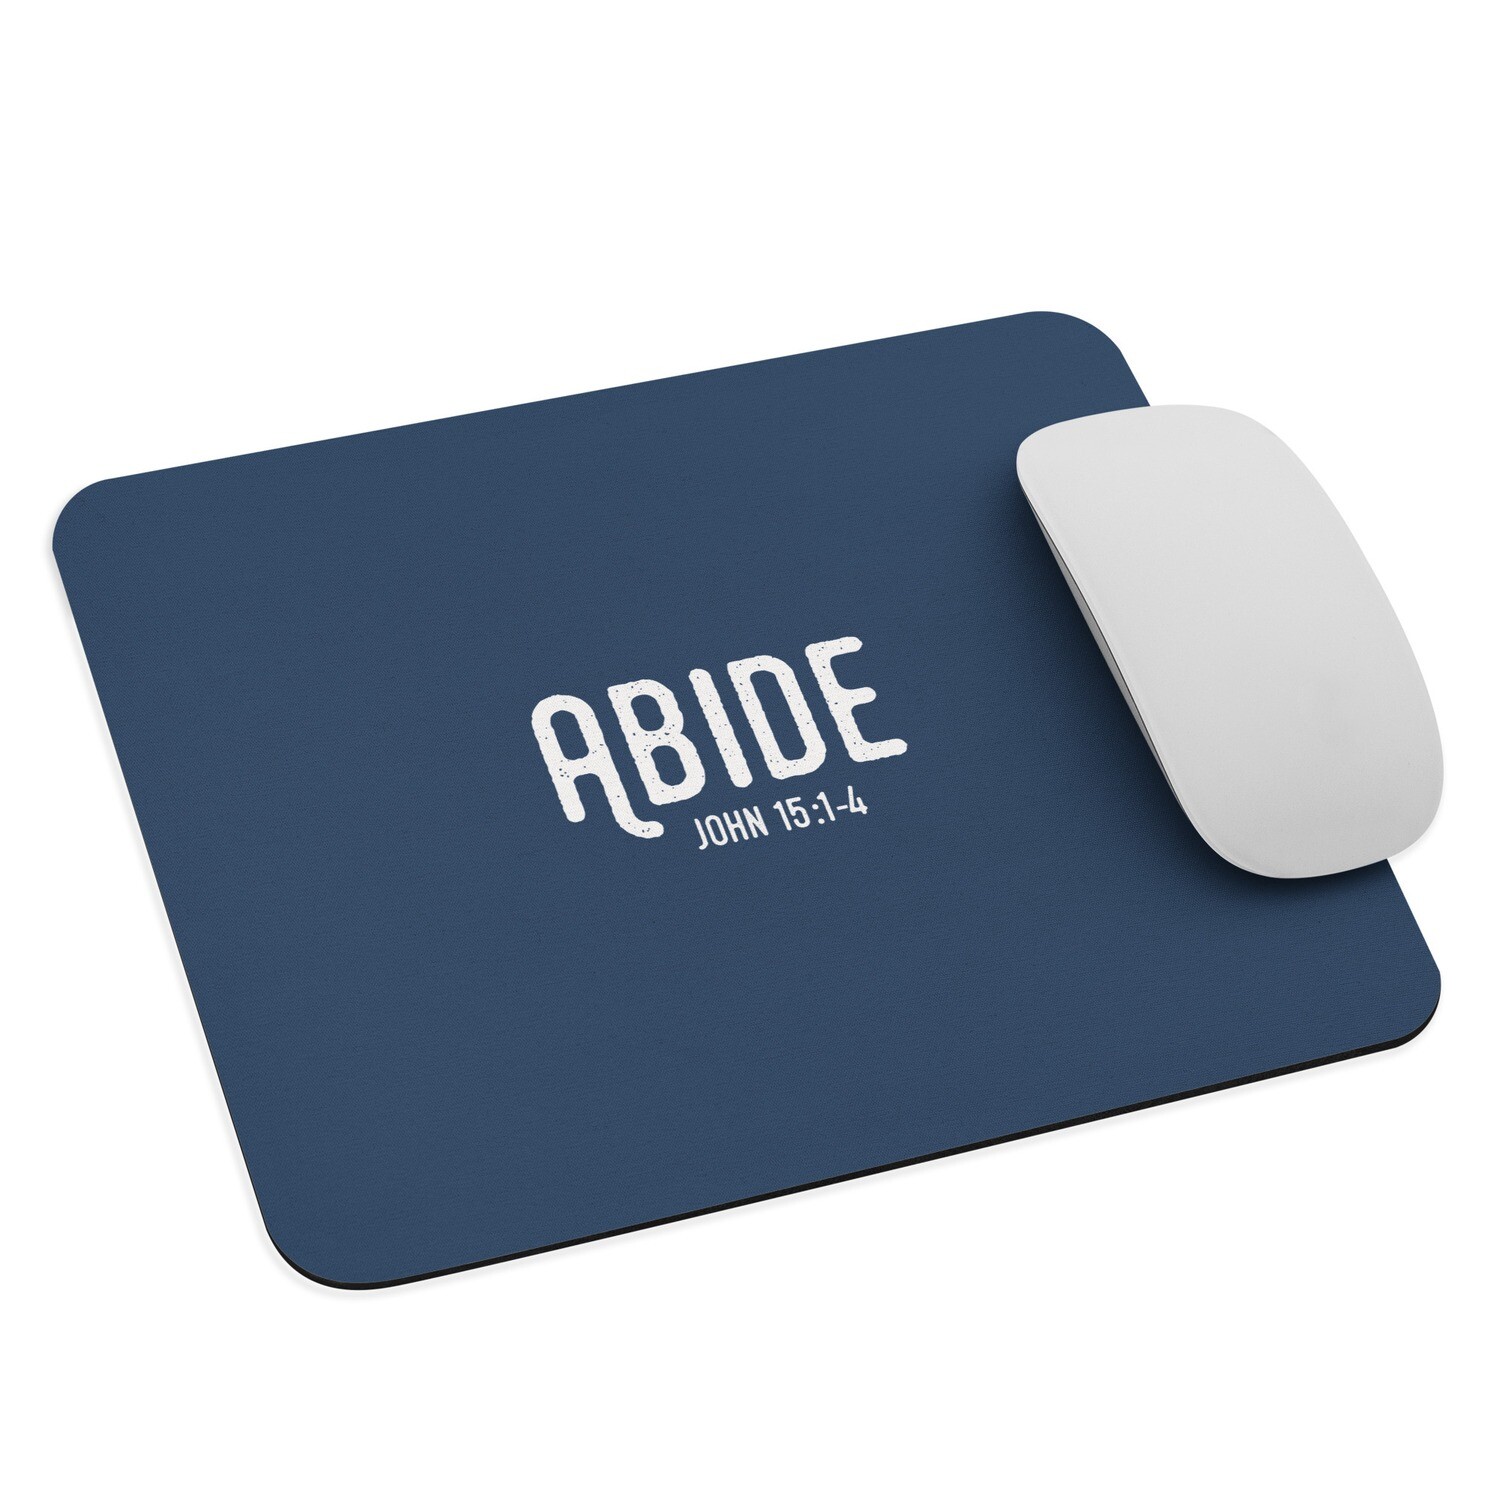 Abide - mouse pad (navy)